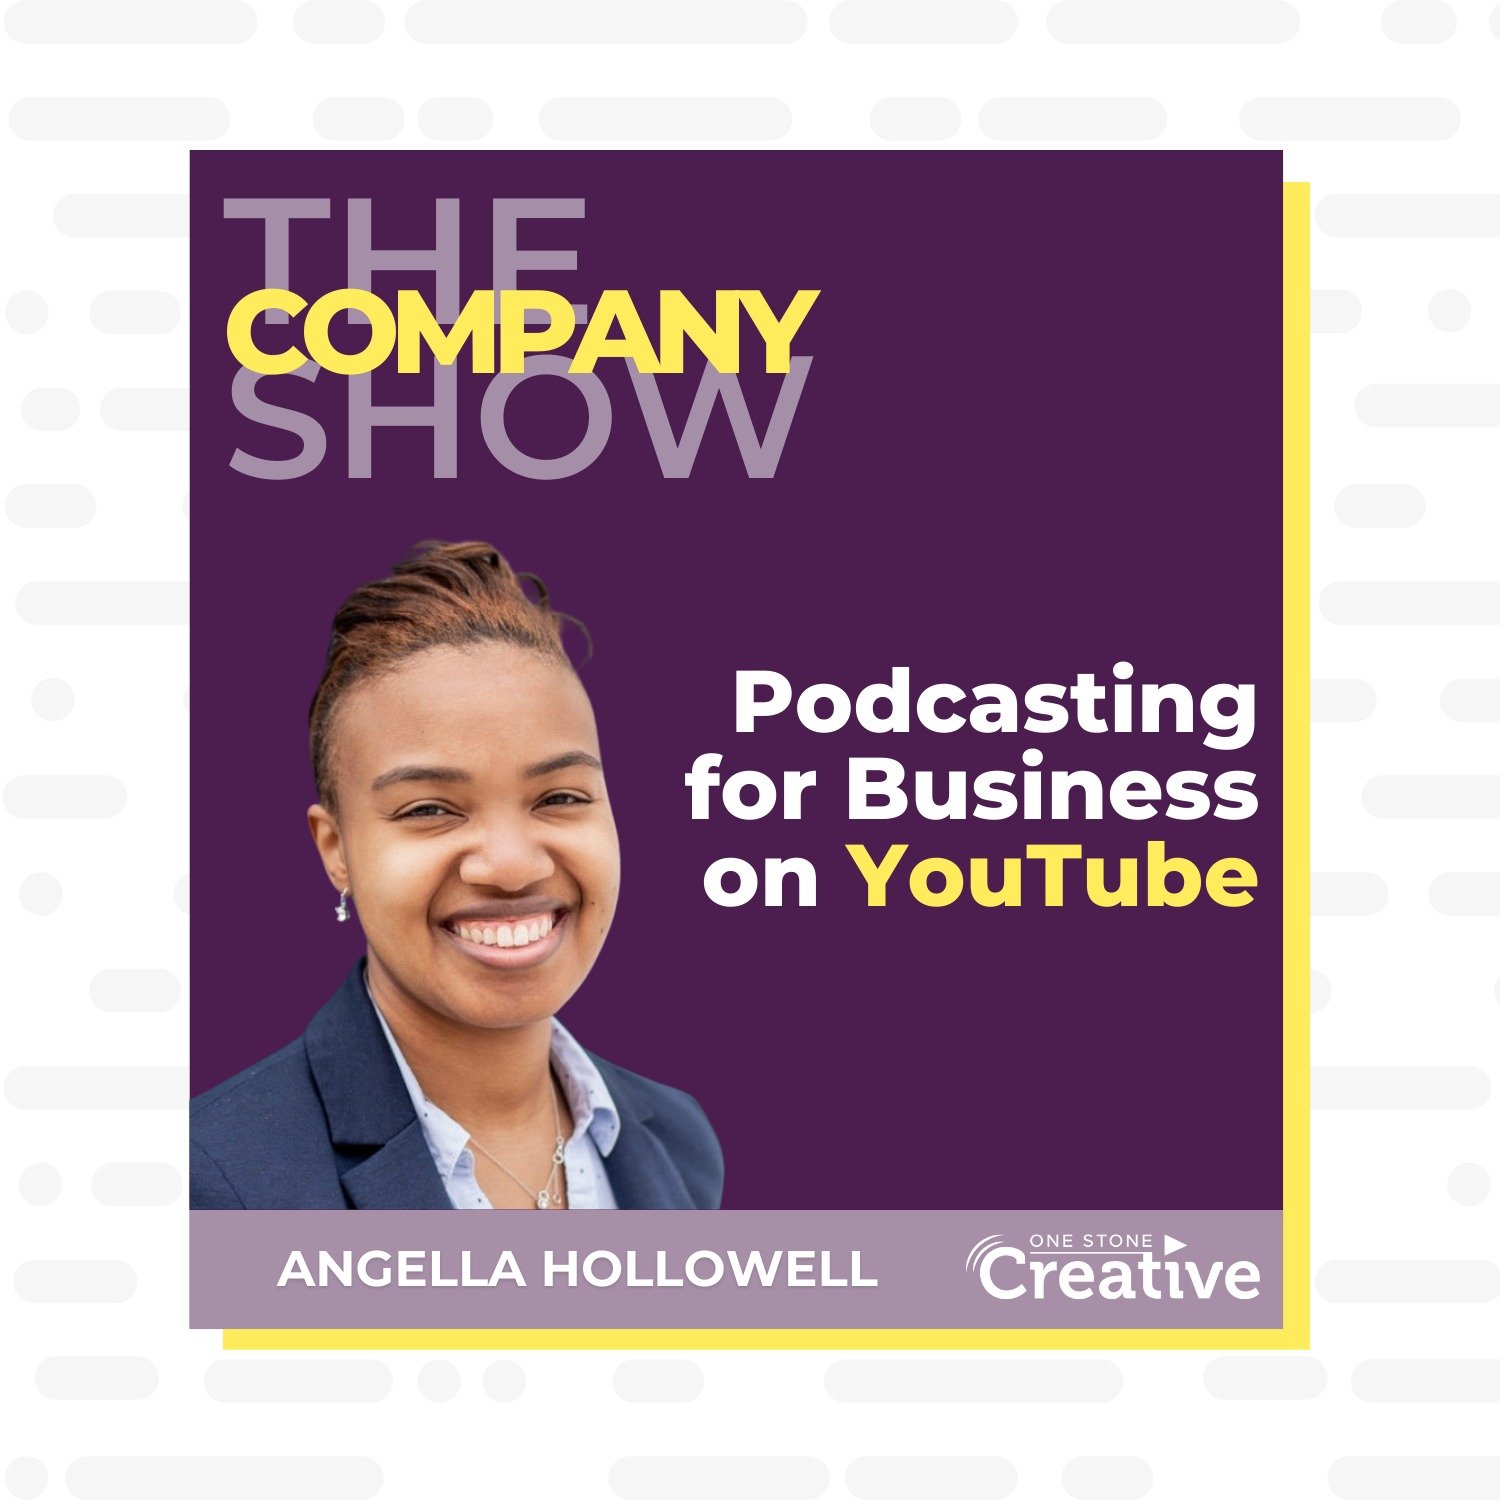 Podcasting for Business on YouTube